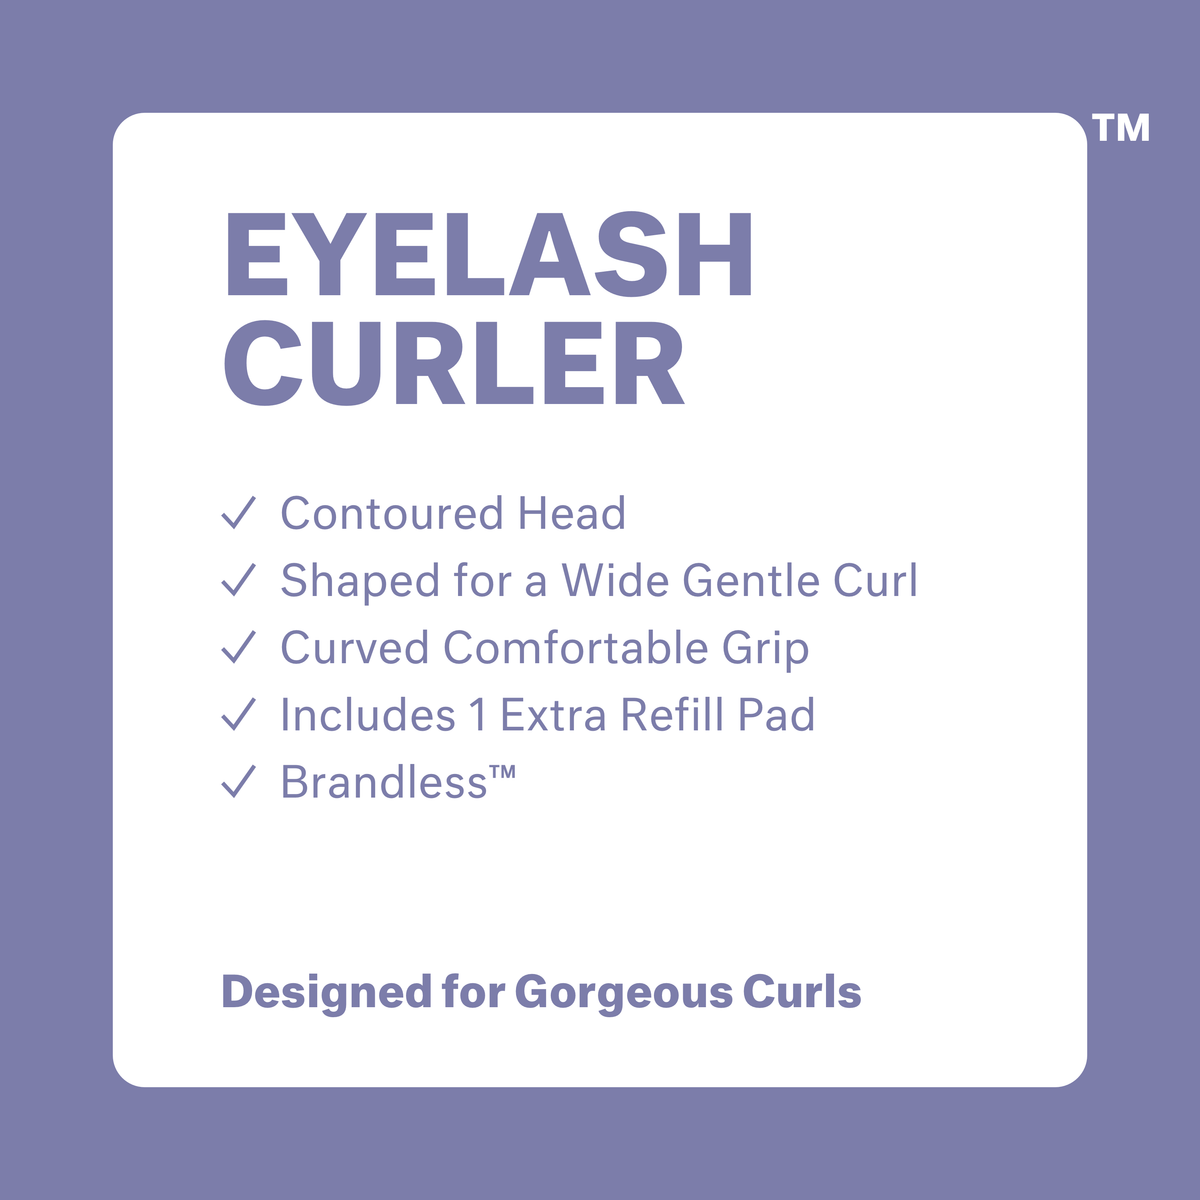 Eyelash Curler: contoured head, shaped for a wide gentle curl, curved comfortable grip, includes 1 extra refil pad, brandless. Designed for beautiful curls.